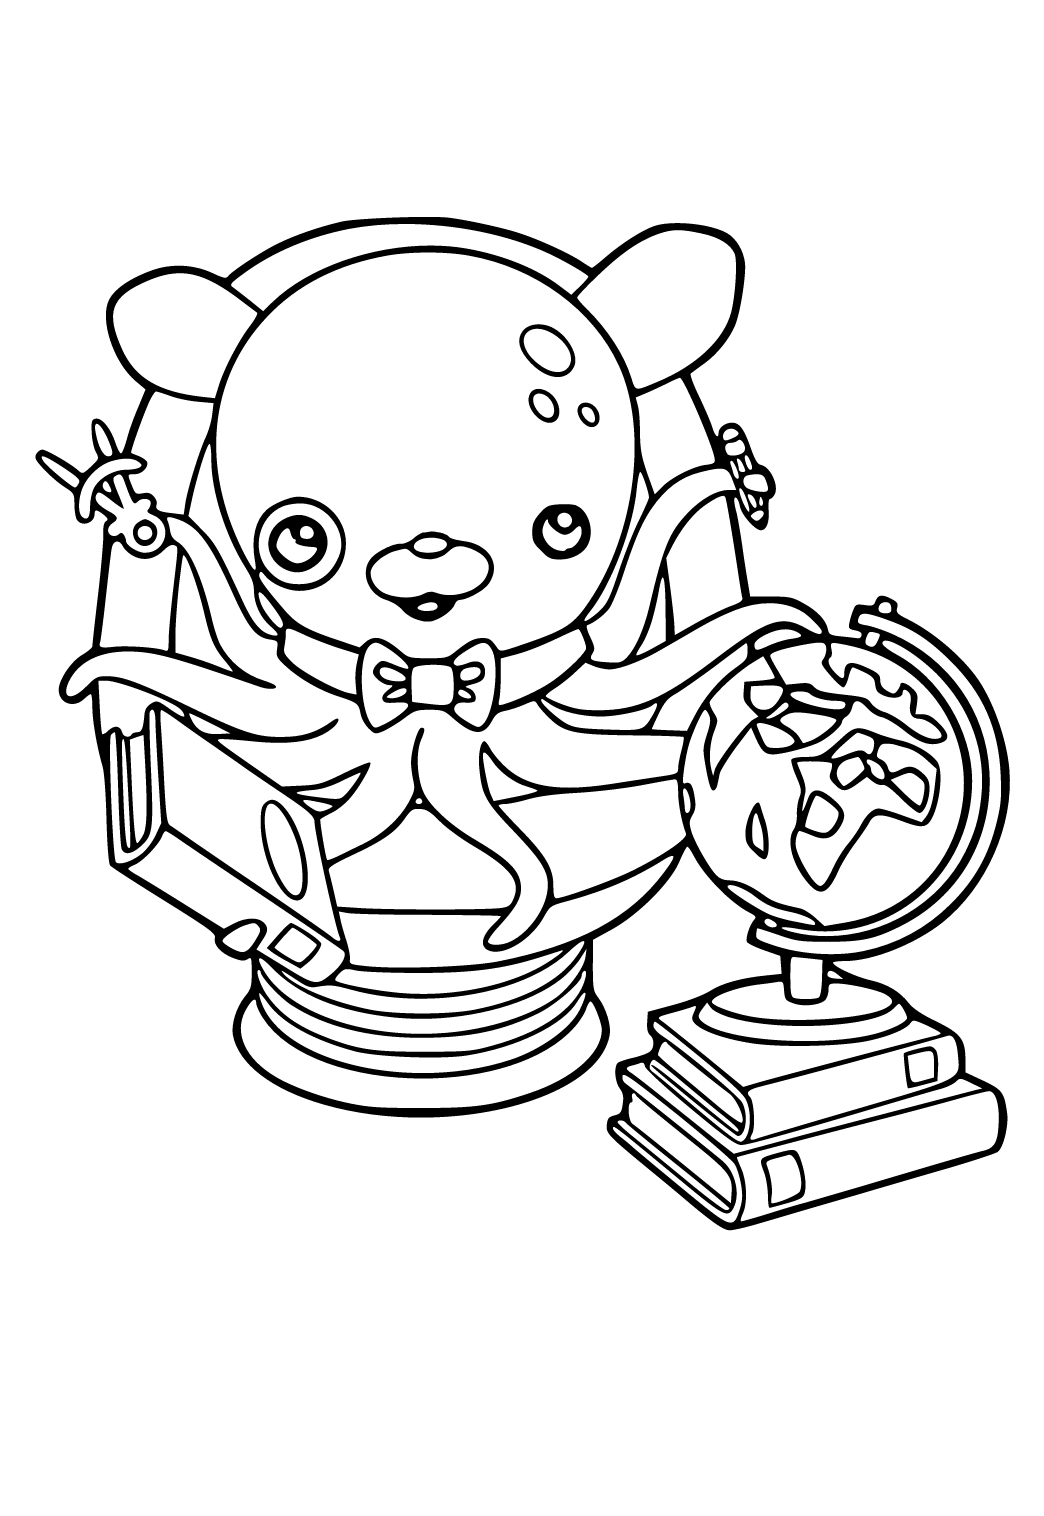 Free printable octonauts octopus coloring page for adults and kids